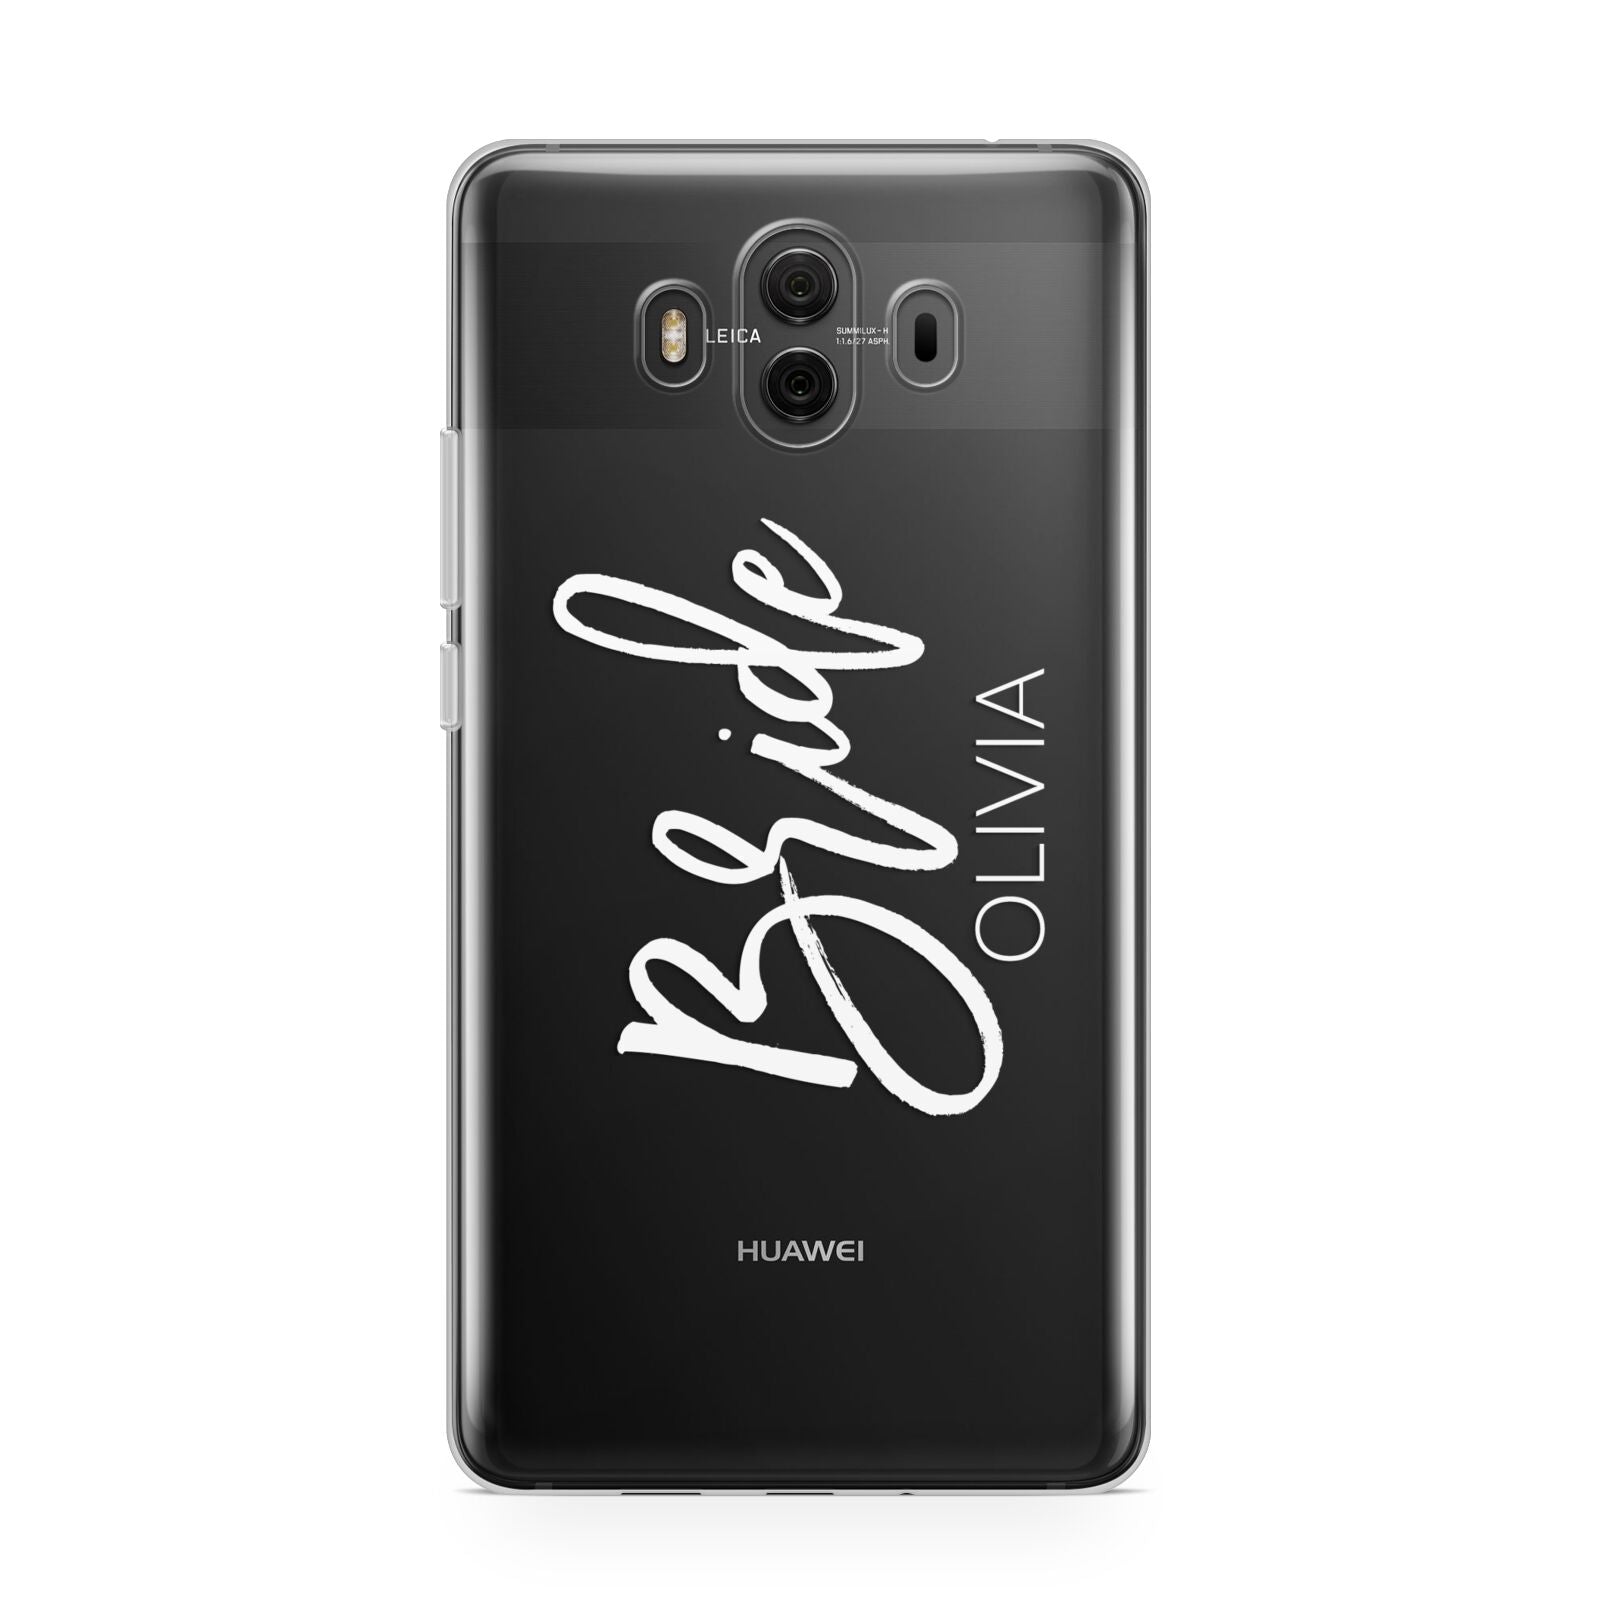 Personalised Bride Huawei Mate 10 Protective Phone Case